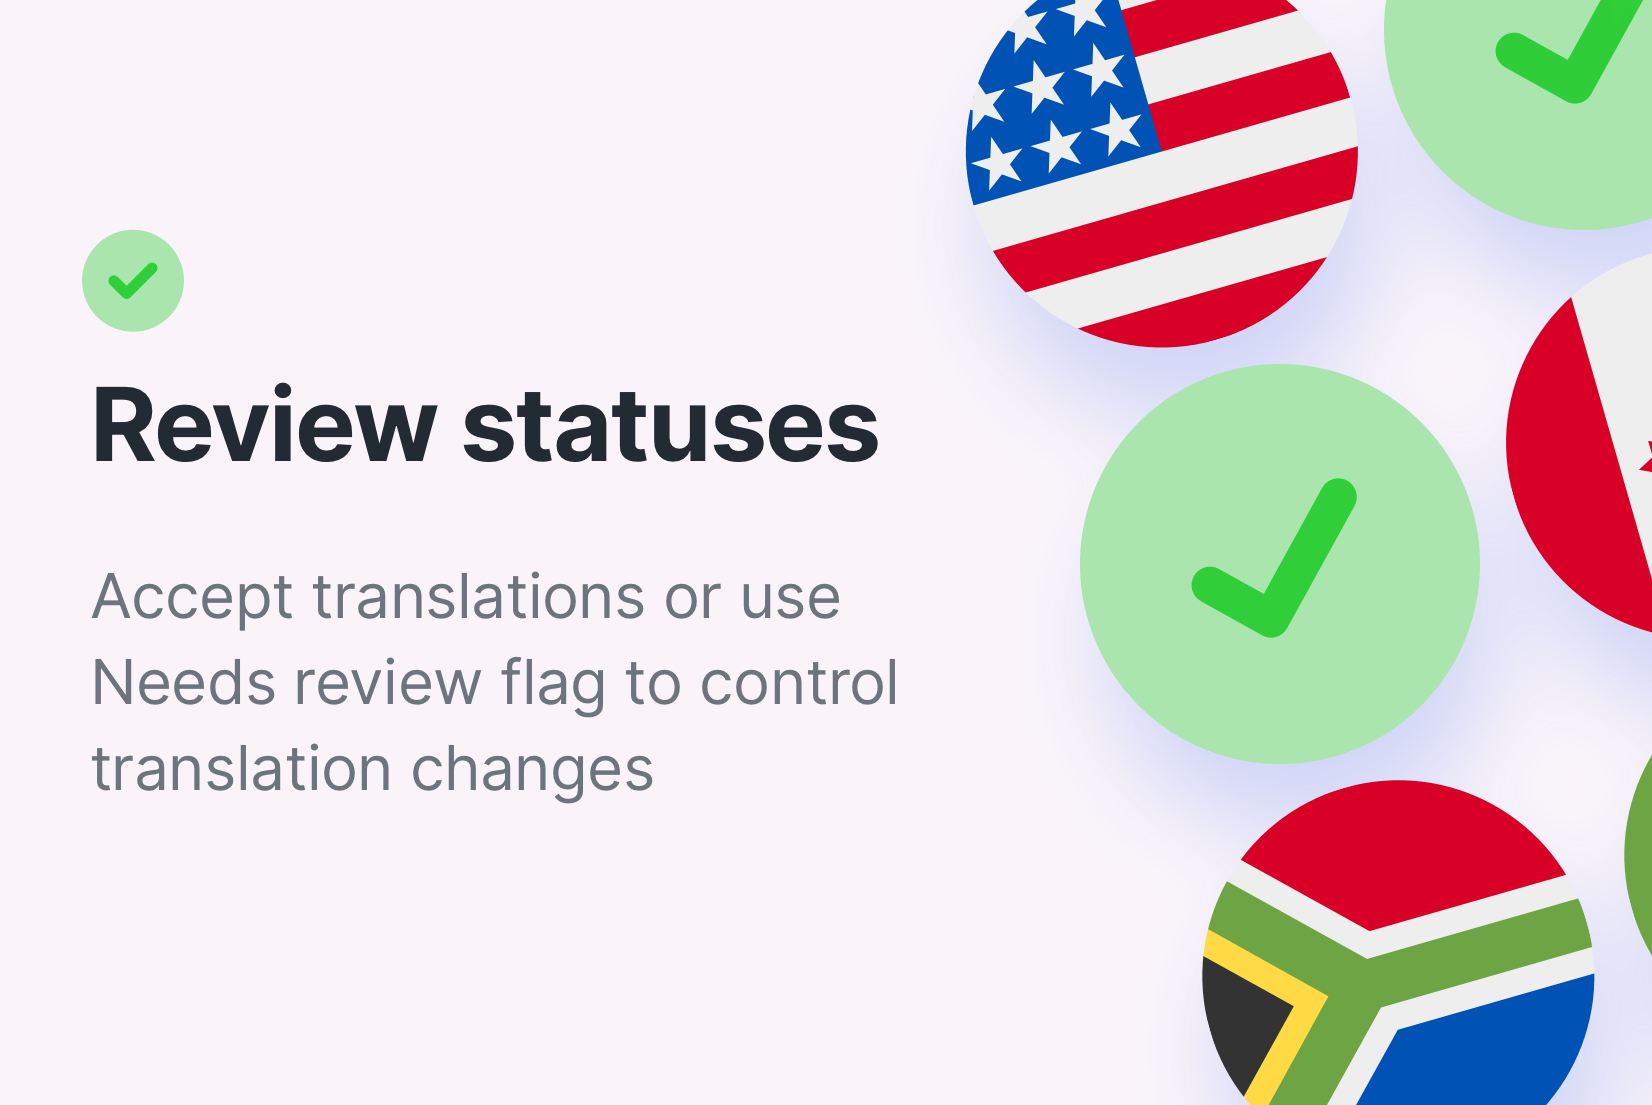 Manage translation changes using review statuses